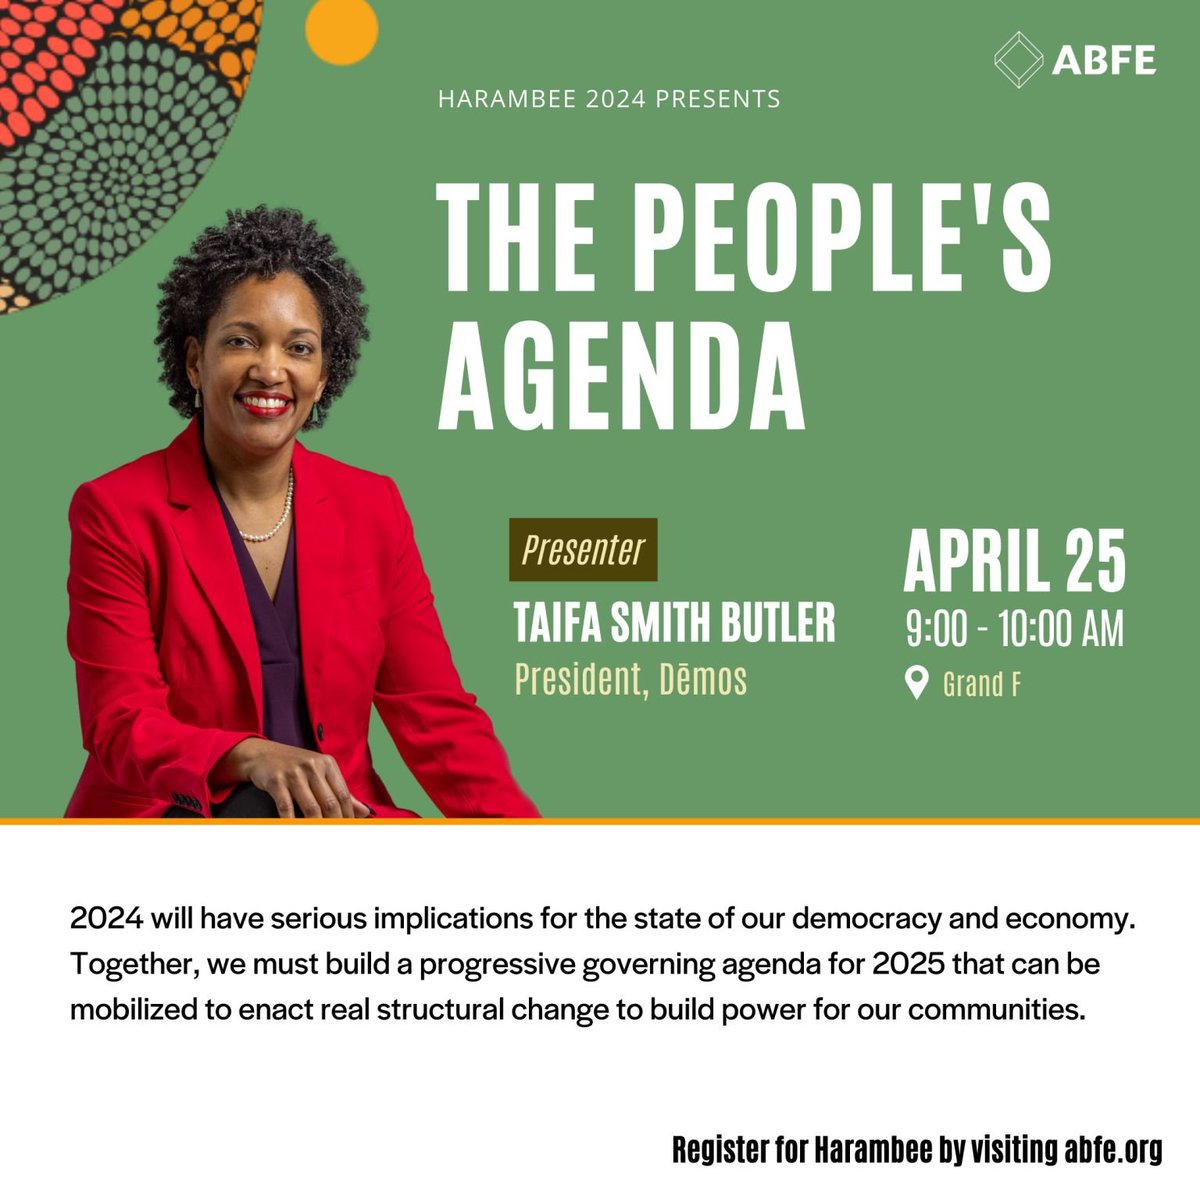 If If you're going to be at @ABFE in St. Louis next week, join @TaifaButler to learn more about the #PowerAgenda and the need for a strong shared strategy across the progressive movement!